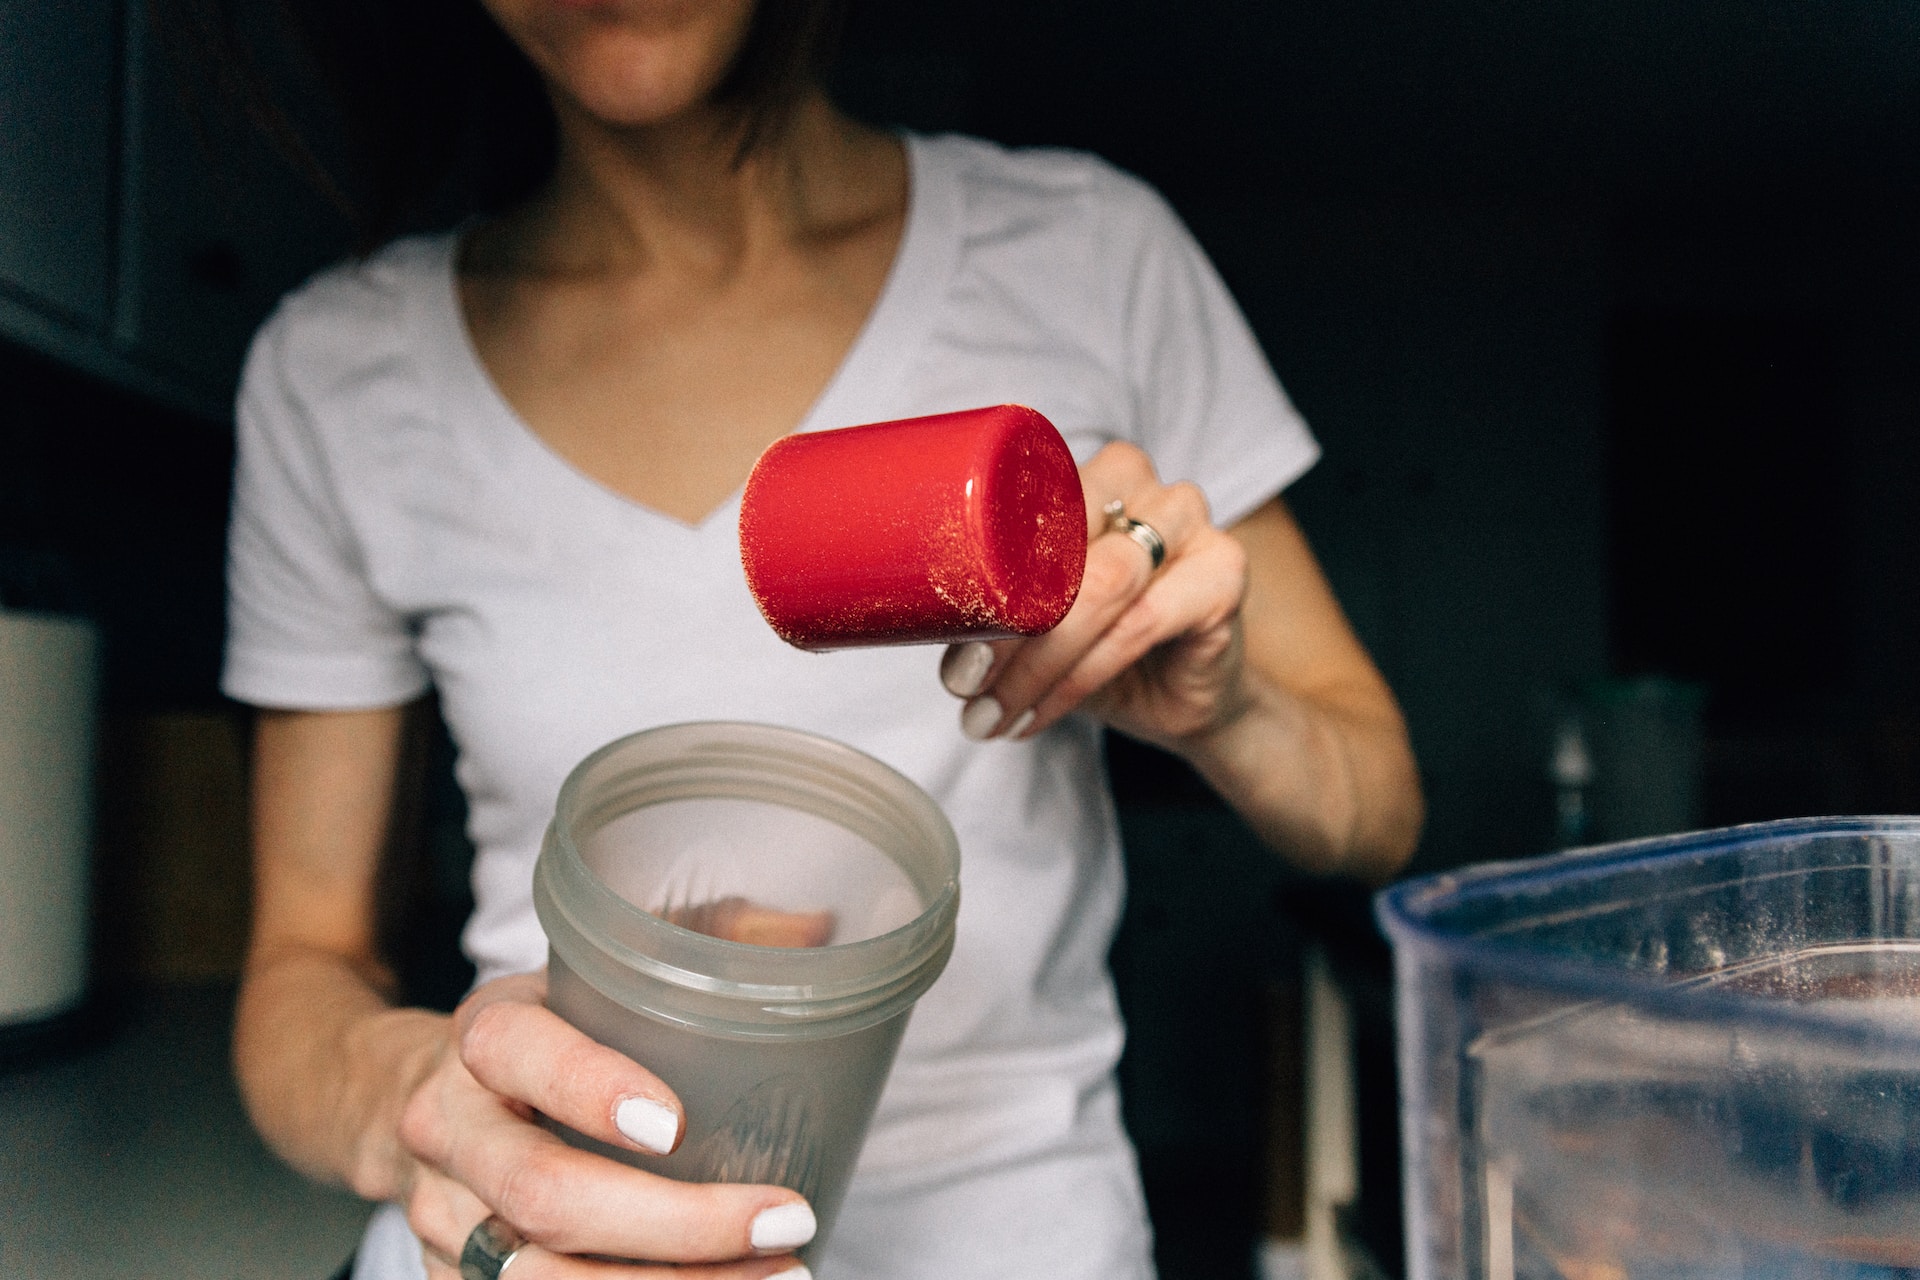 A woman wearing a white v-neck shirt is holding a red scoop and plastic tumbler